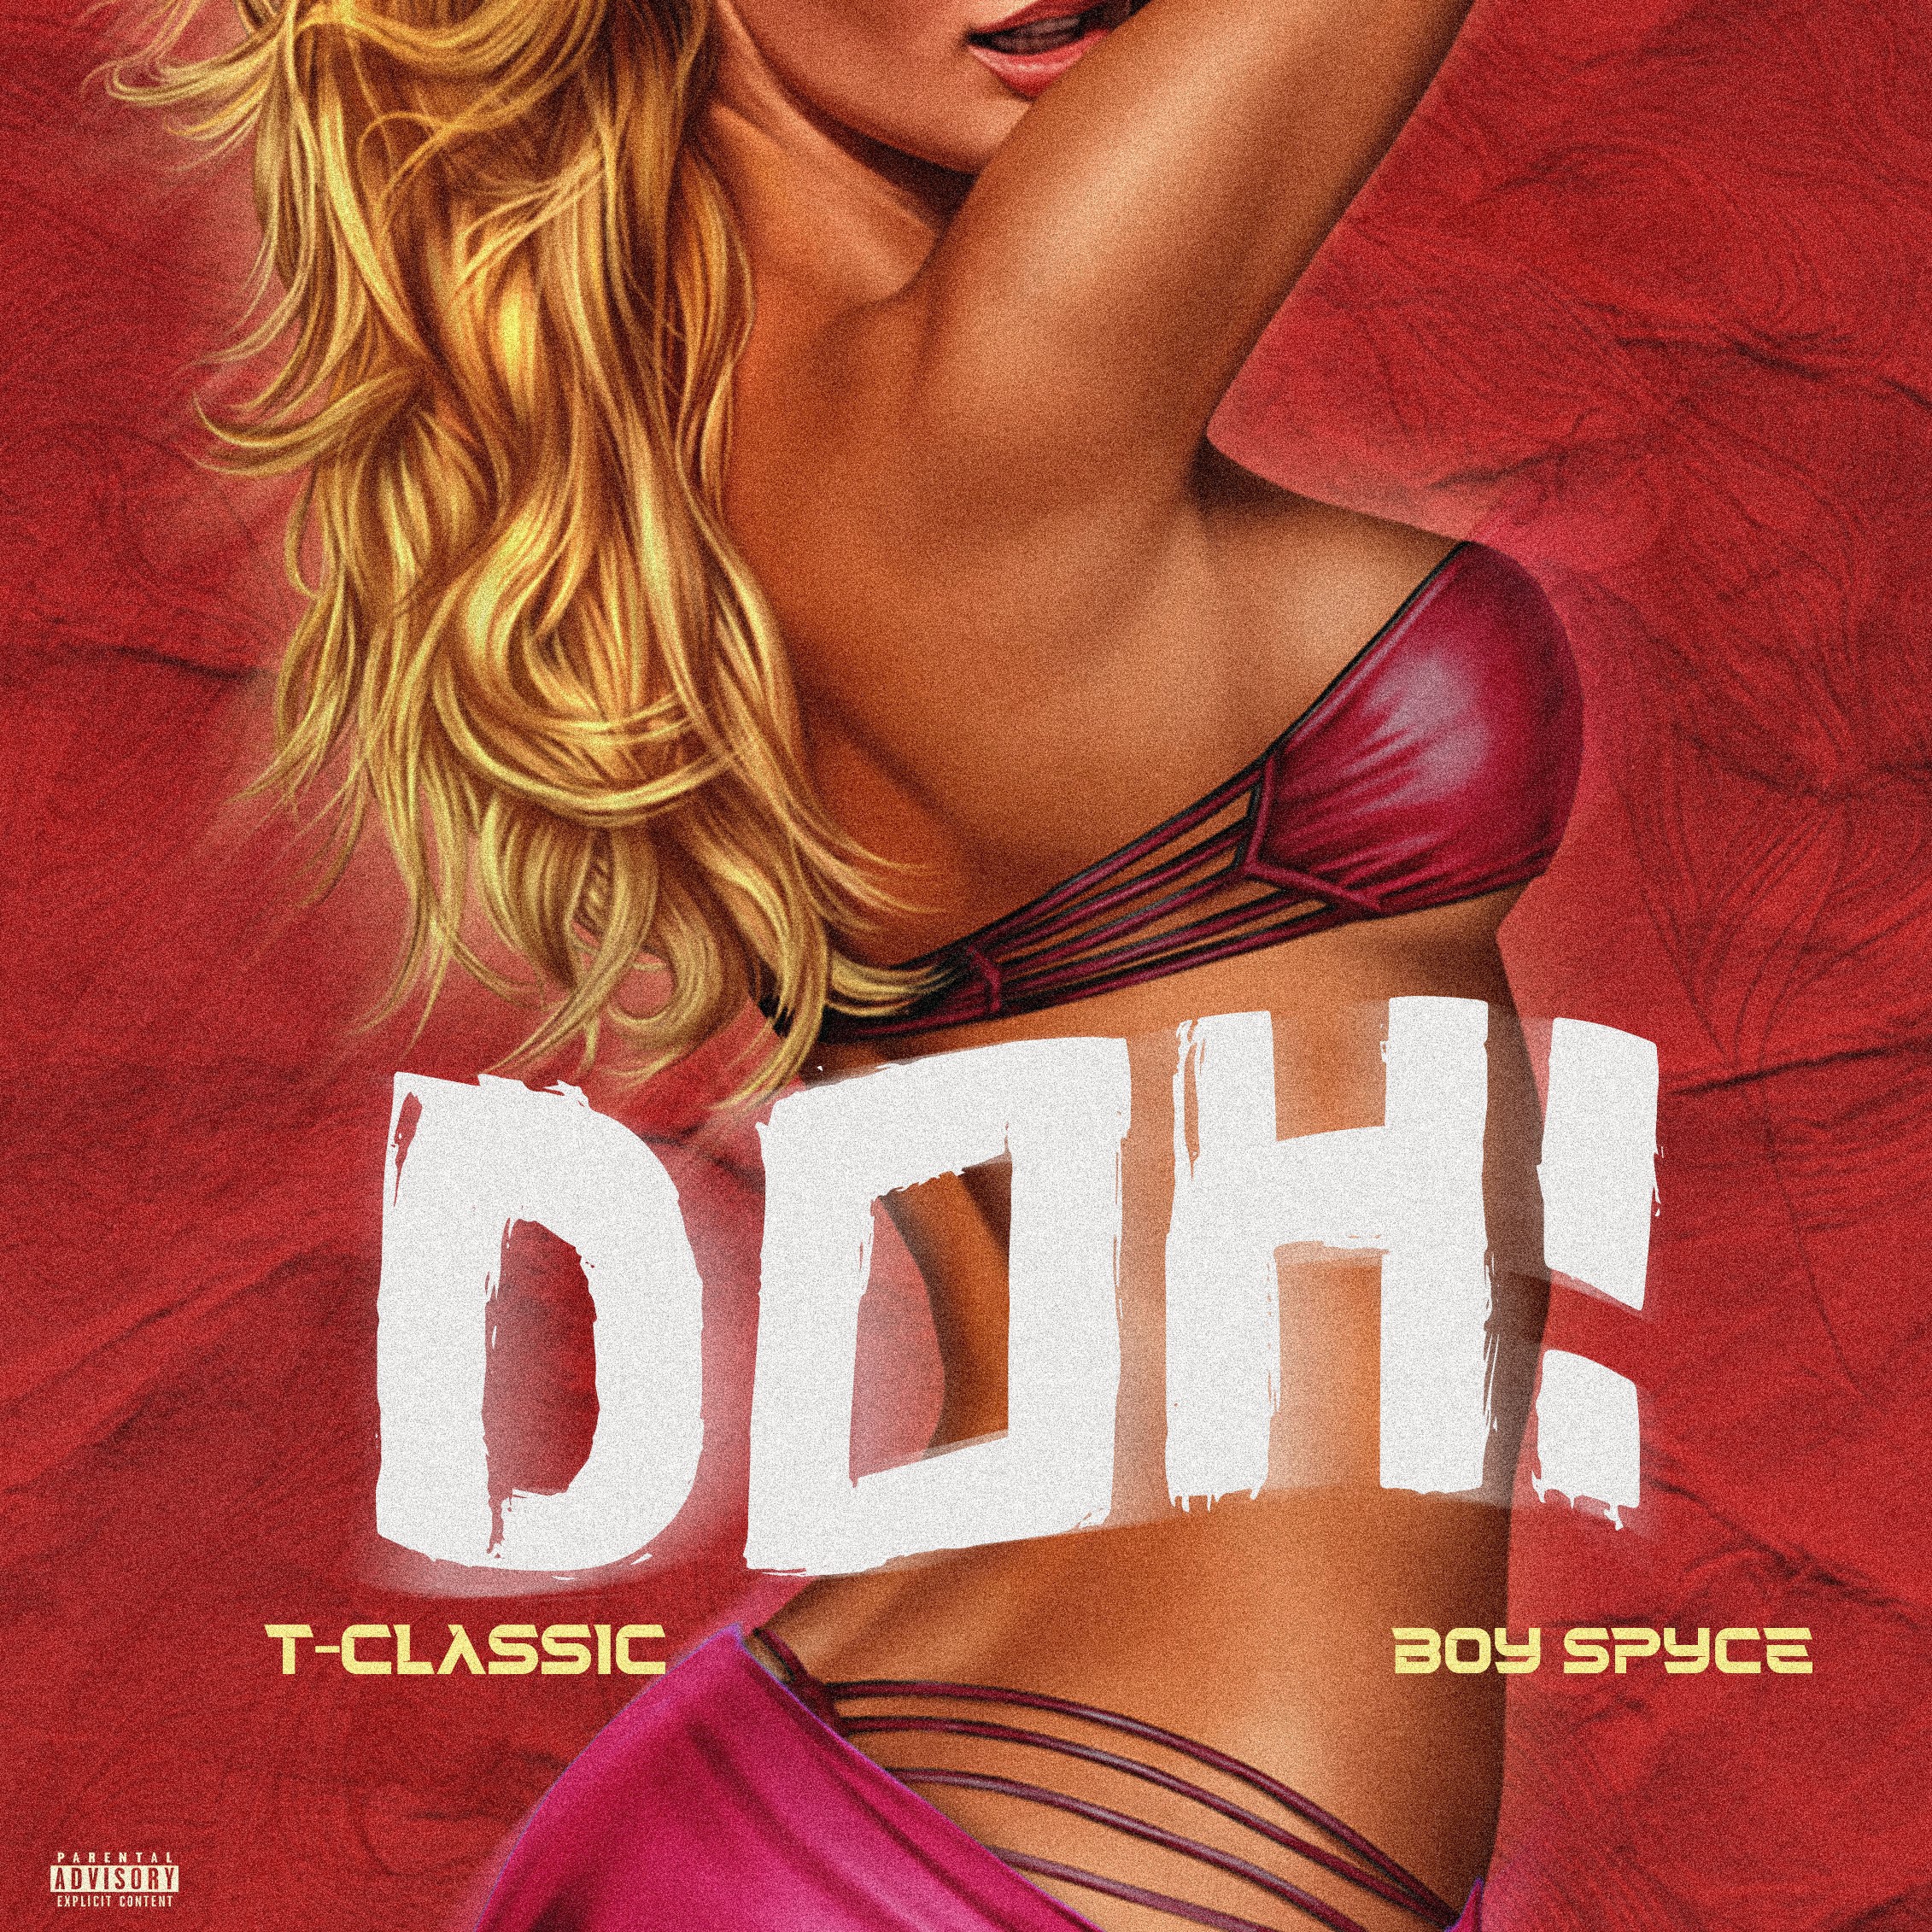 "Doh": A Soul-Stirring Love Ballad by T Classic and Boy Spyce